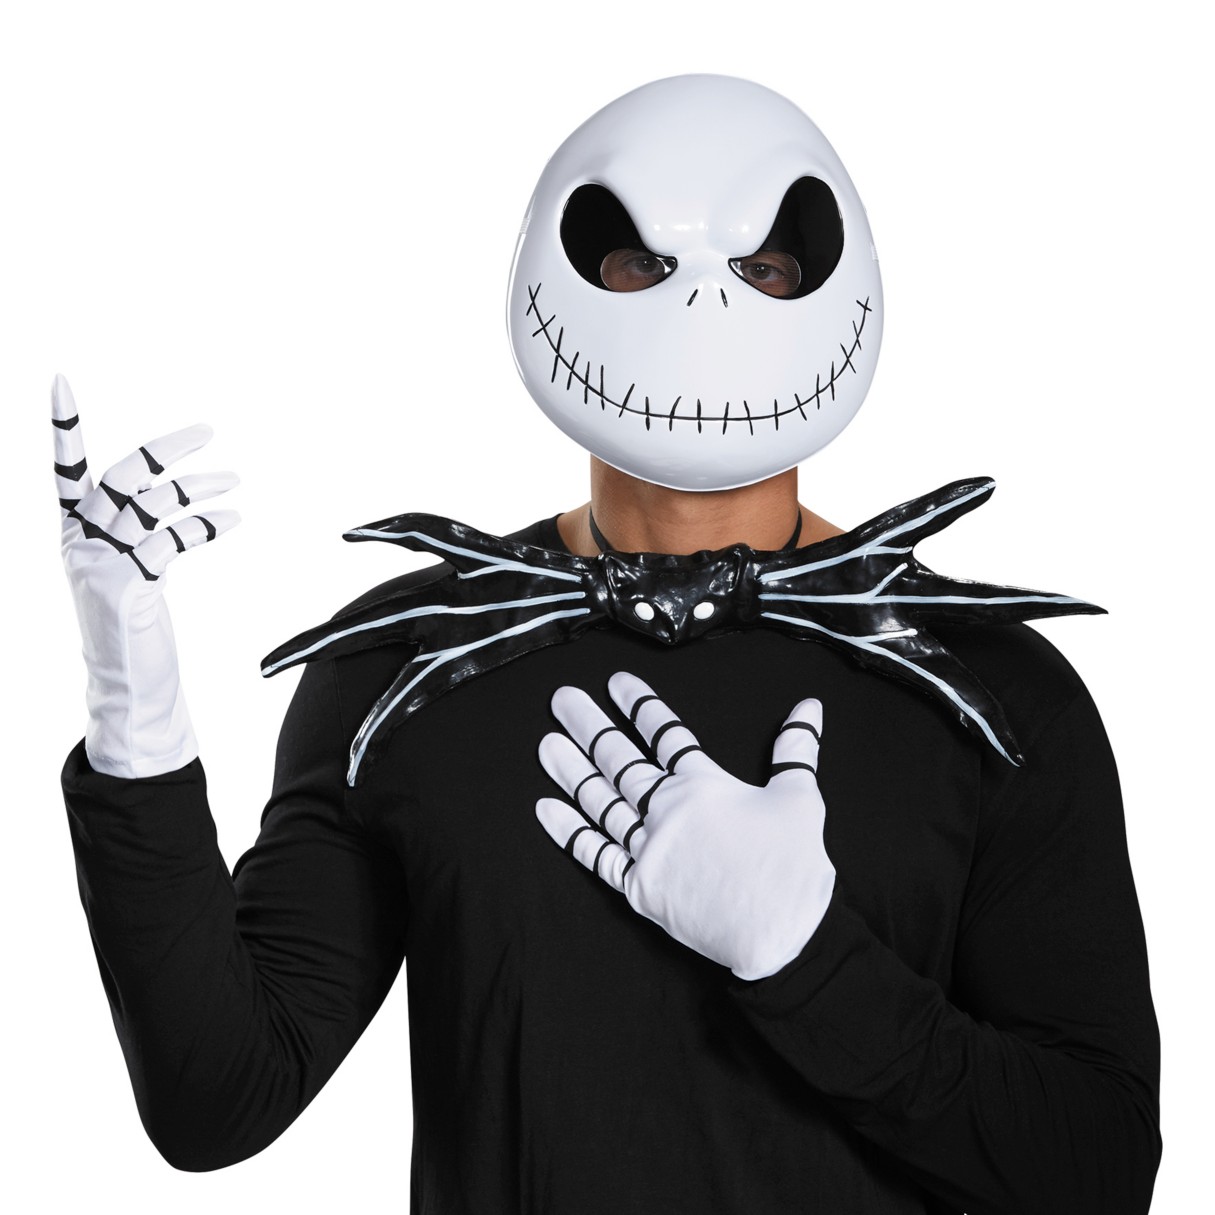 Jack Skellington Costume Accessories Kit for Adults by Disguise - The Nightmare Before Christmas